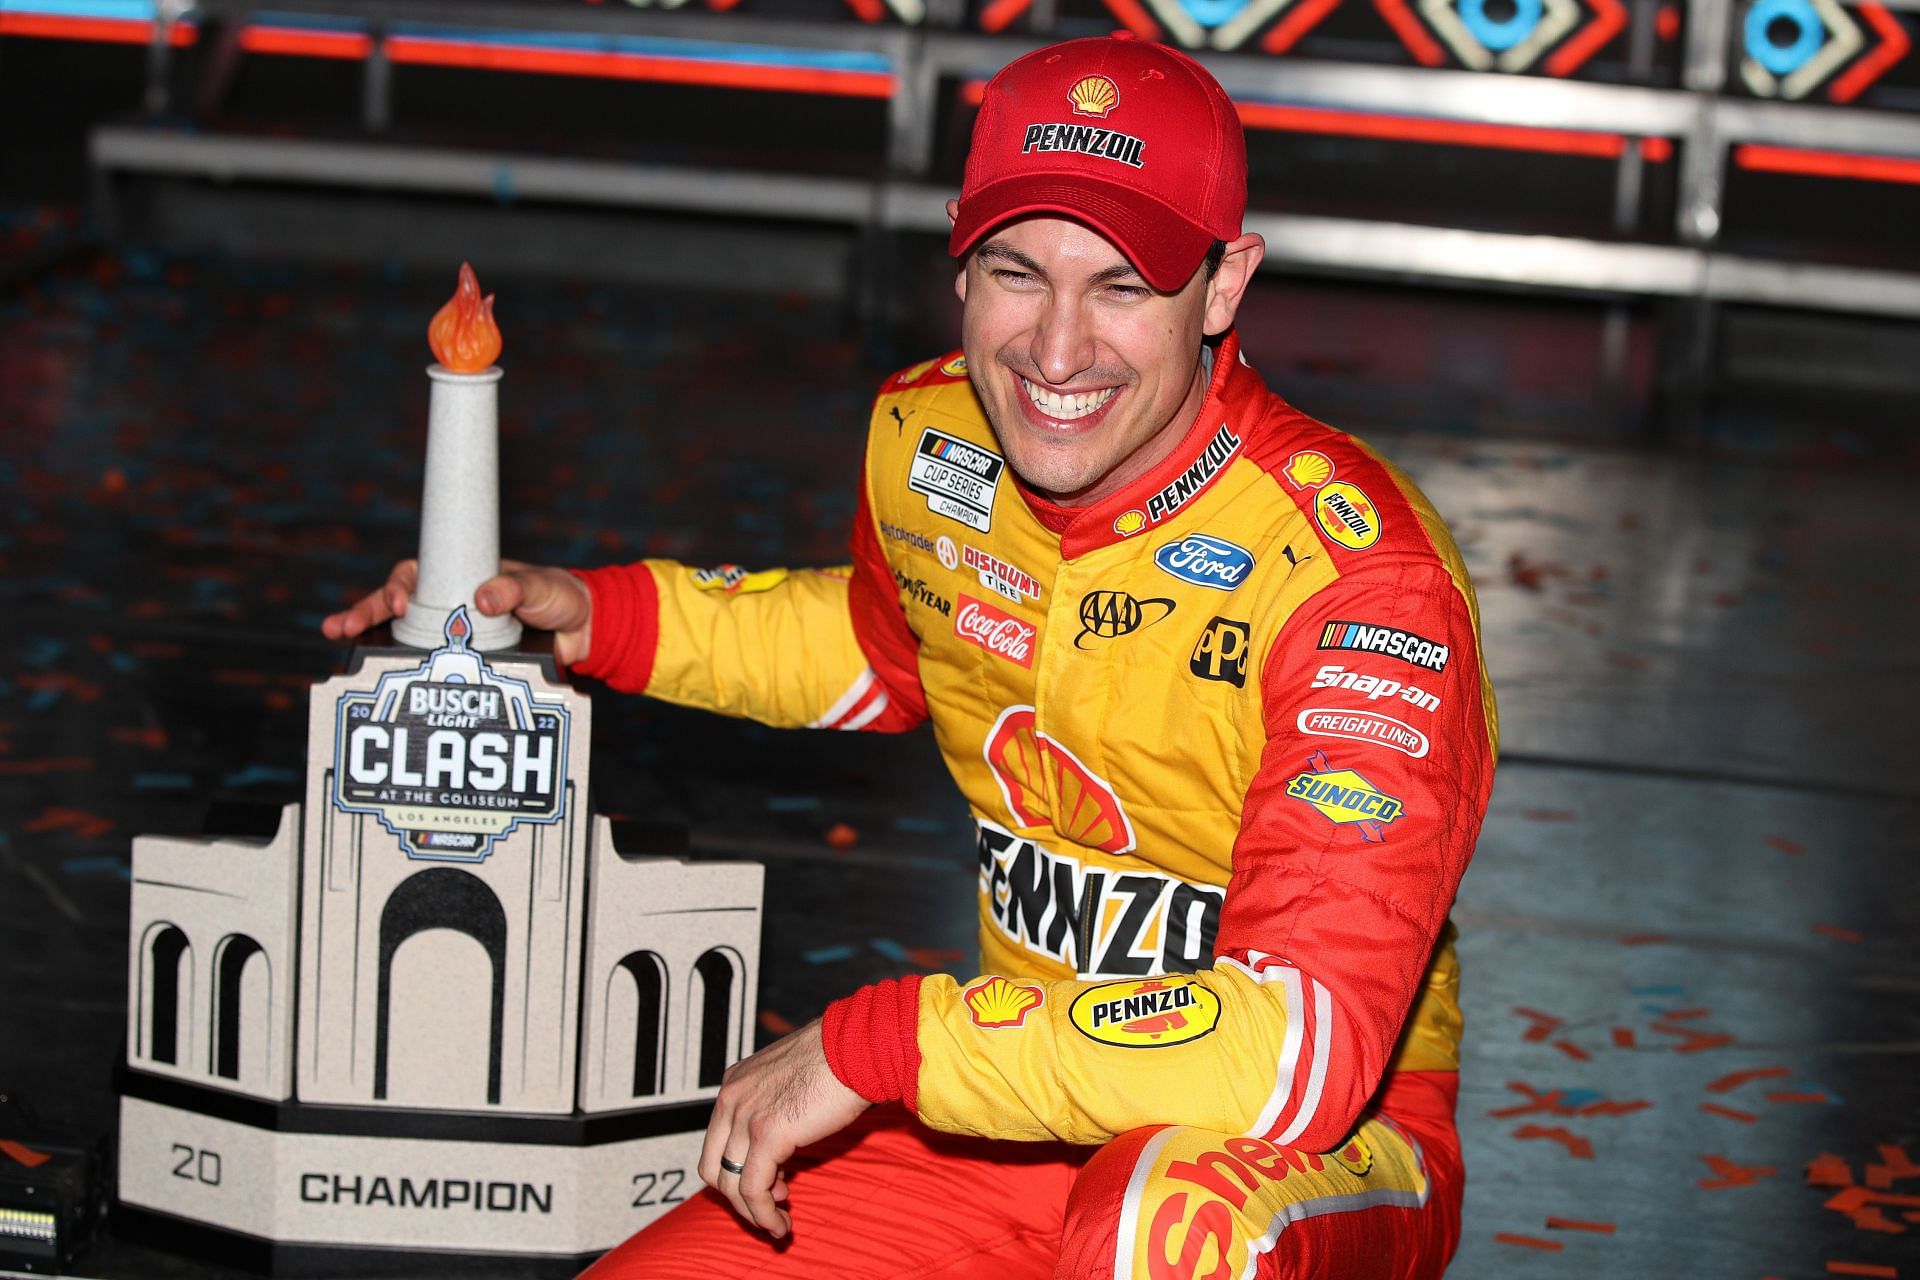 NASCAR Cup Series Busch Light Clash - Joey Logano with his trophy